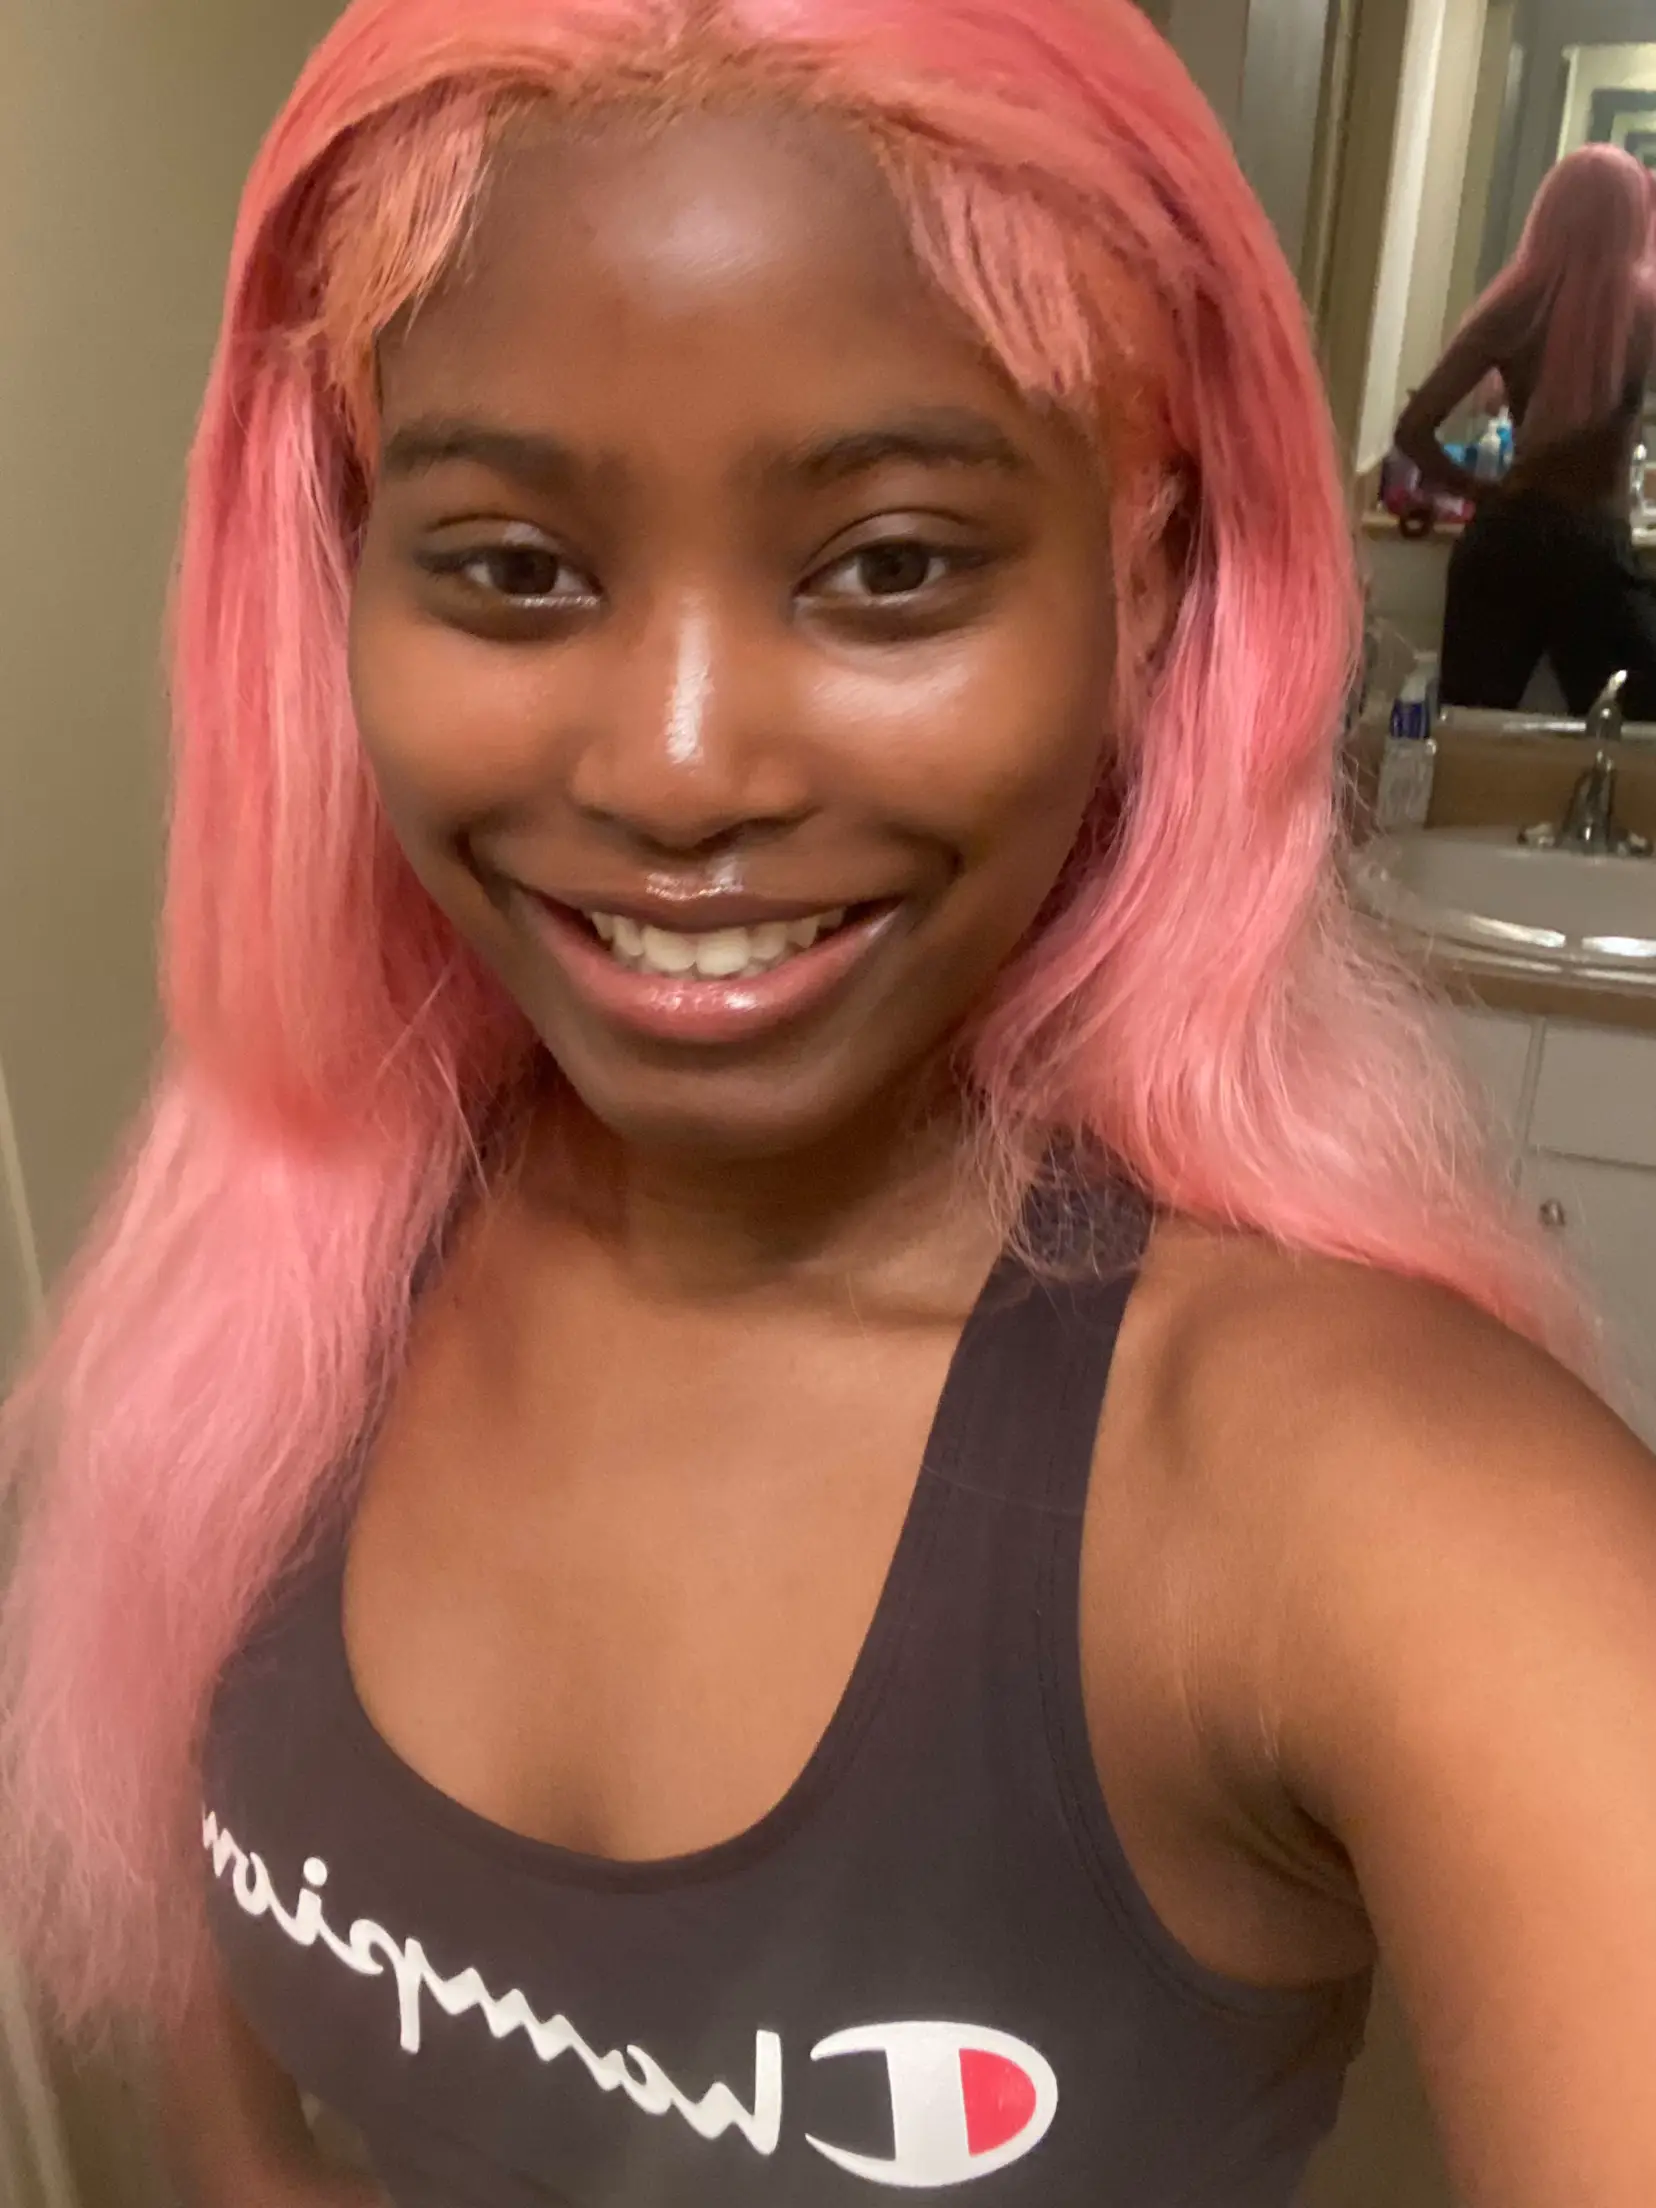 Beginner Friendly Wig Install, Video published by Lafemme_Cecile